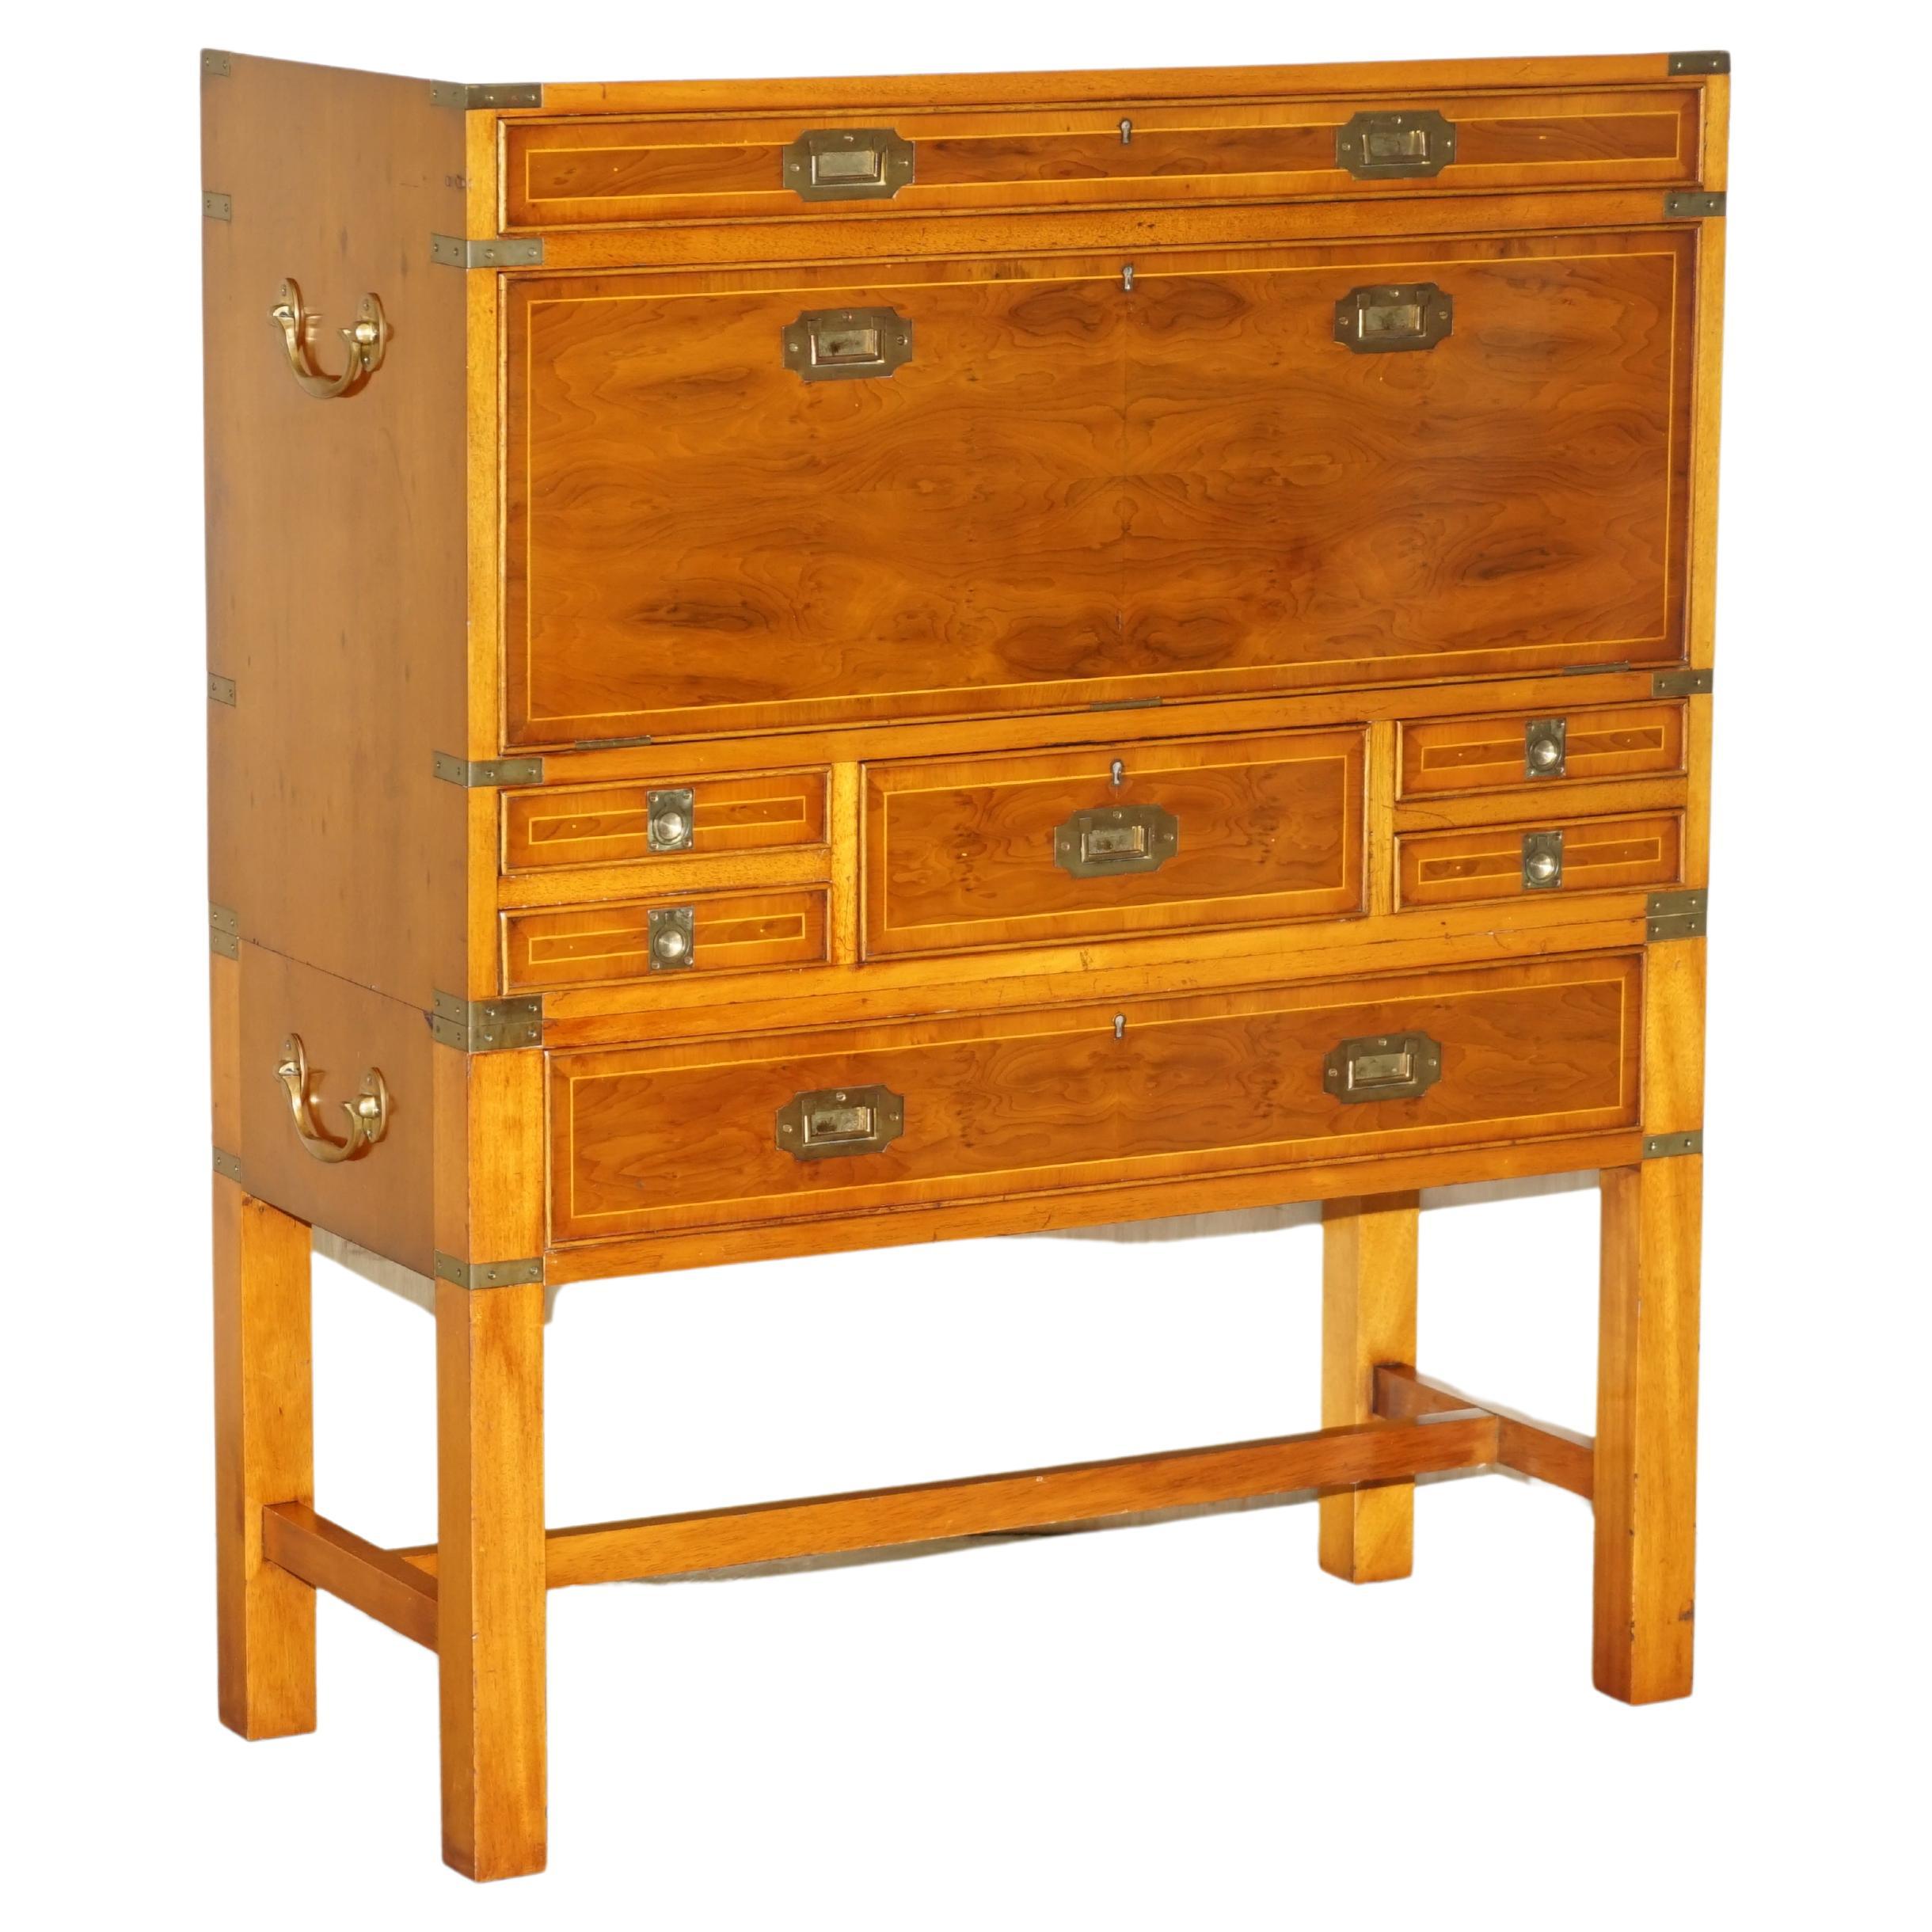 Harrods Kennedy Burr Yew Wood Green Leather Secrataire Desk Chest of Drawers For Sale